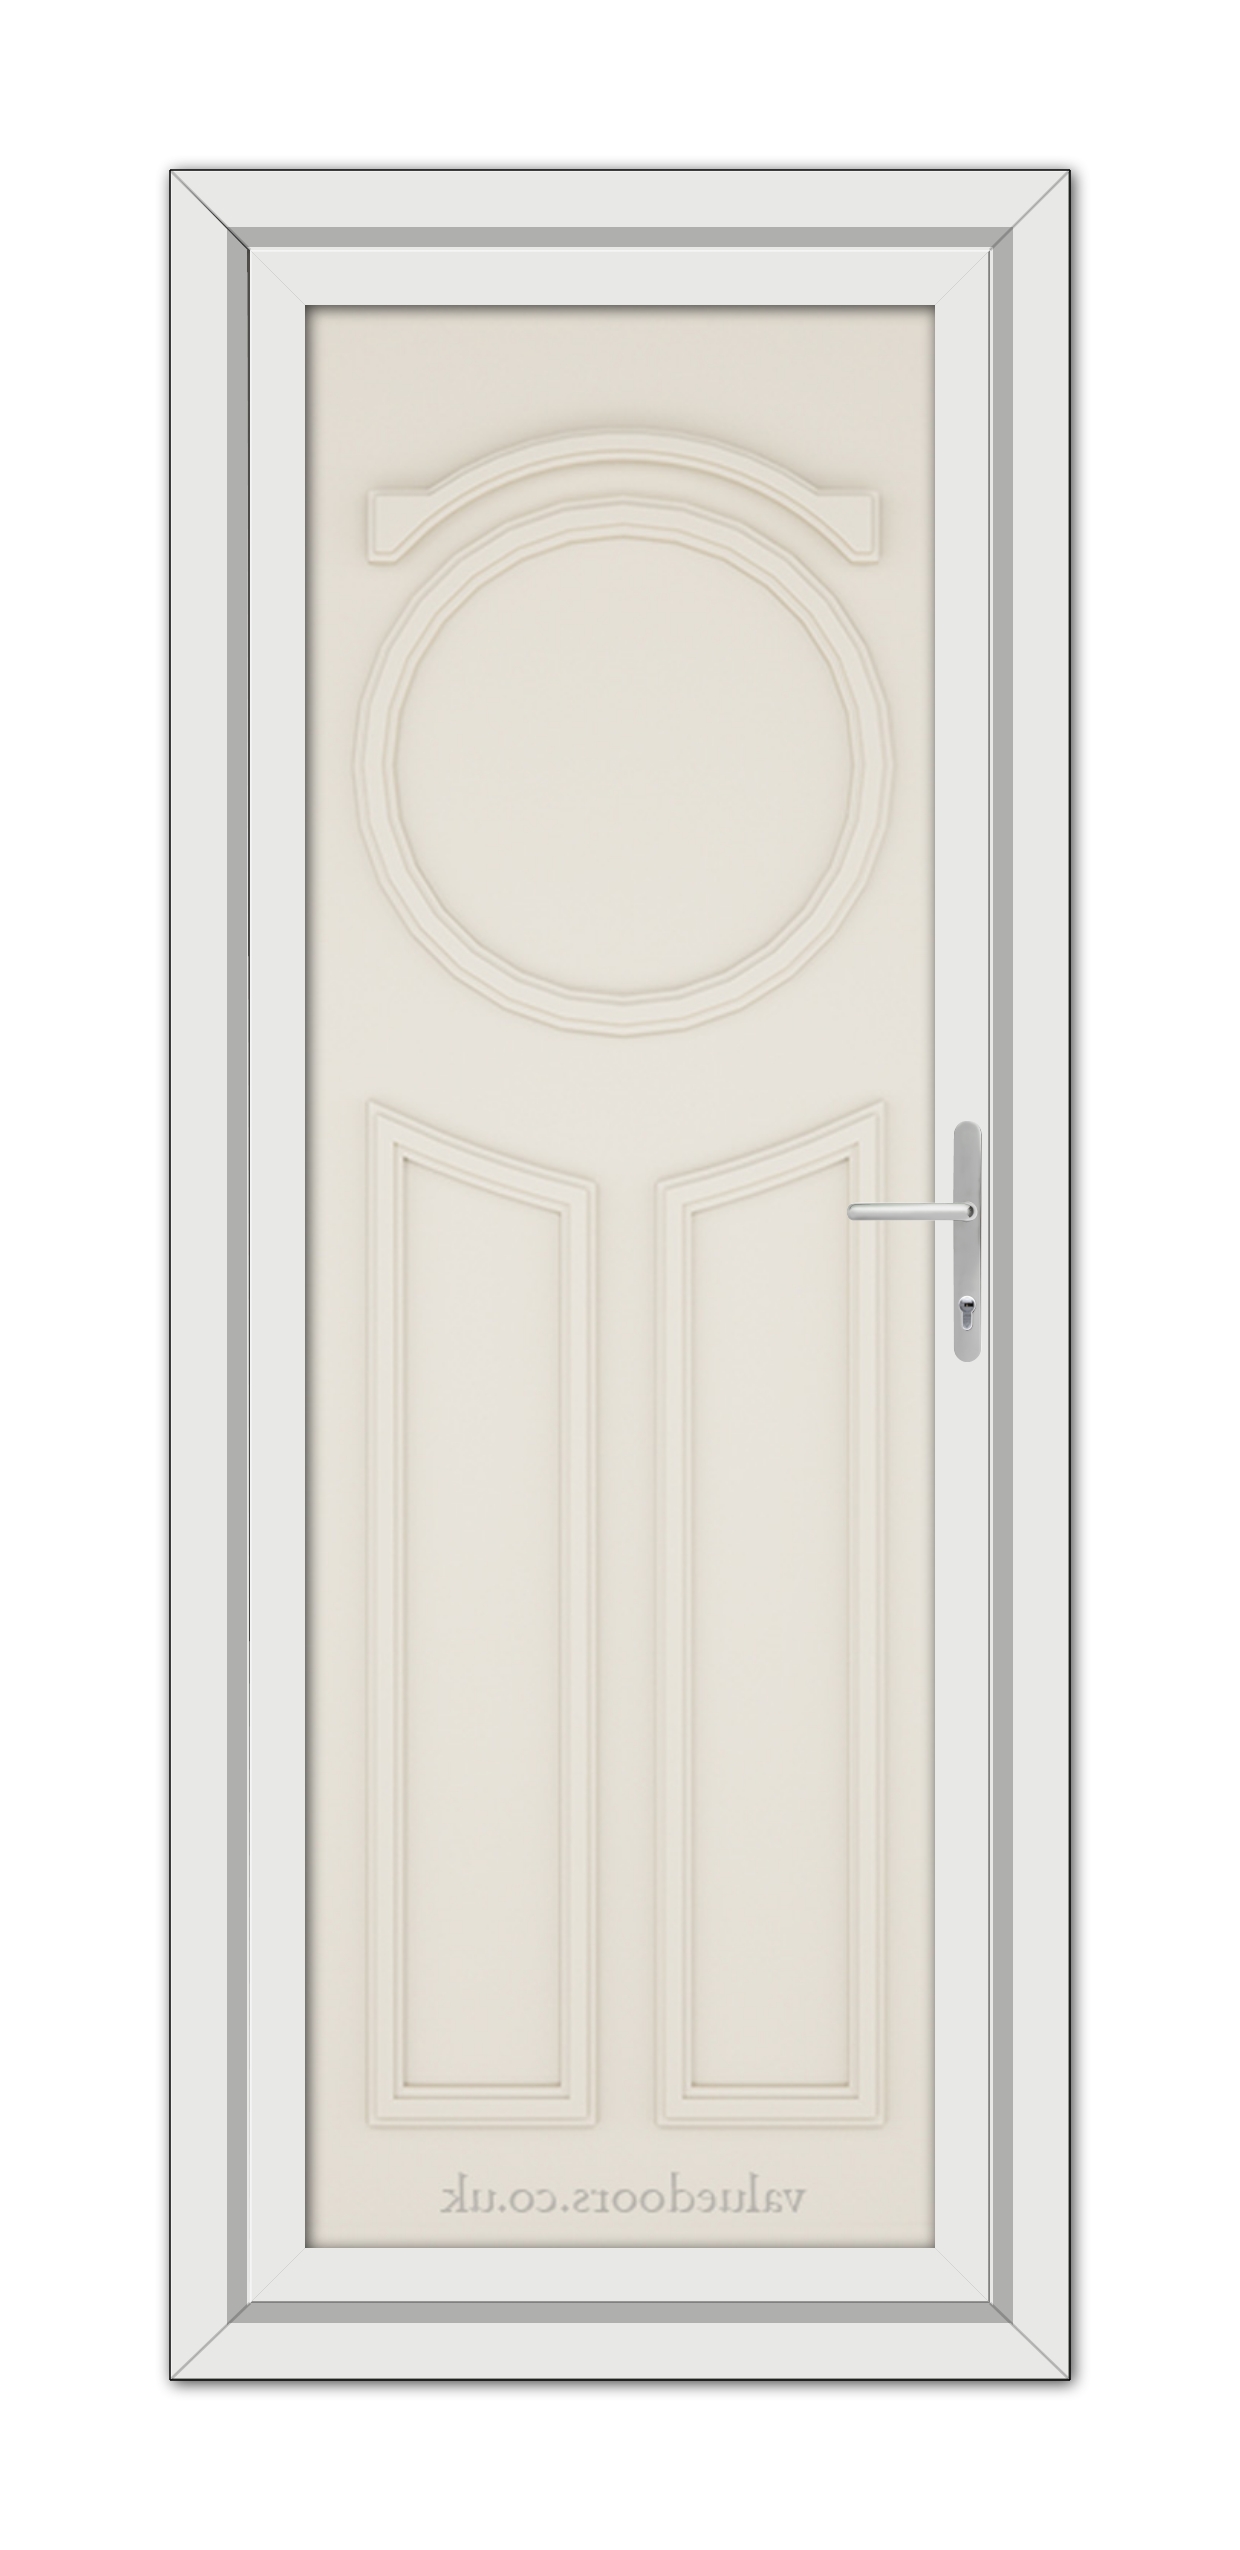 A vertical image of a Cream Blenheim Solid uPVC Door with a round window at the top and a metallic handle on the right side.